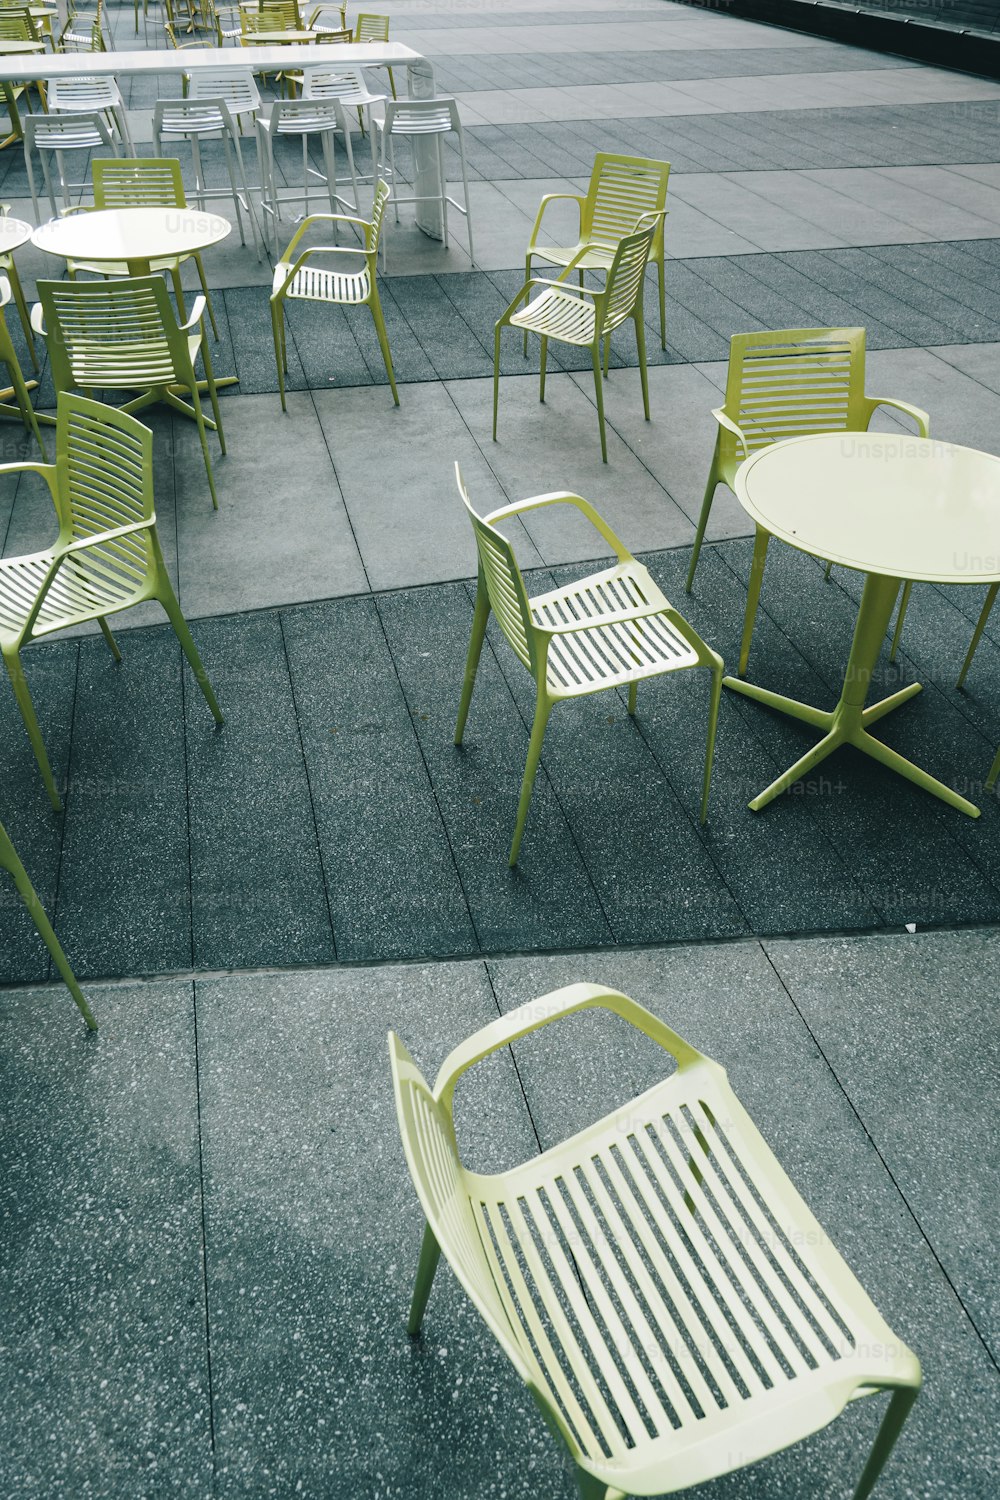 a number of chairs and tables on a sidewalk